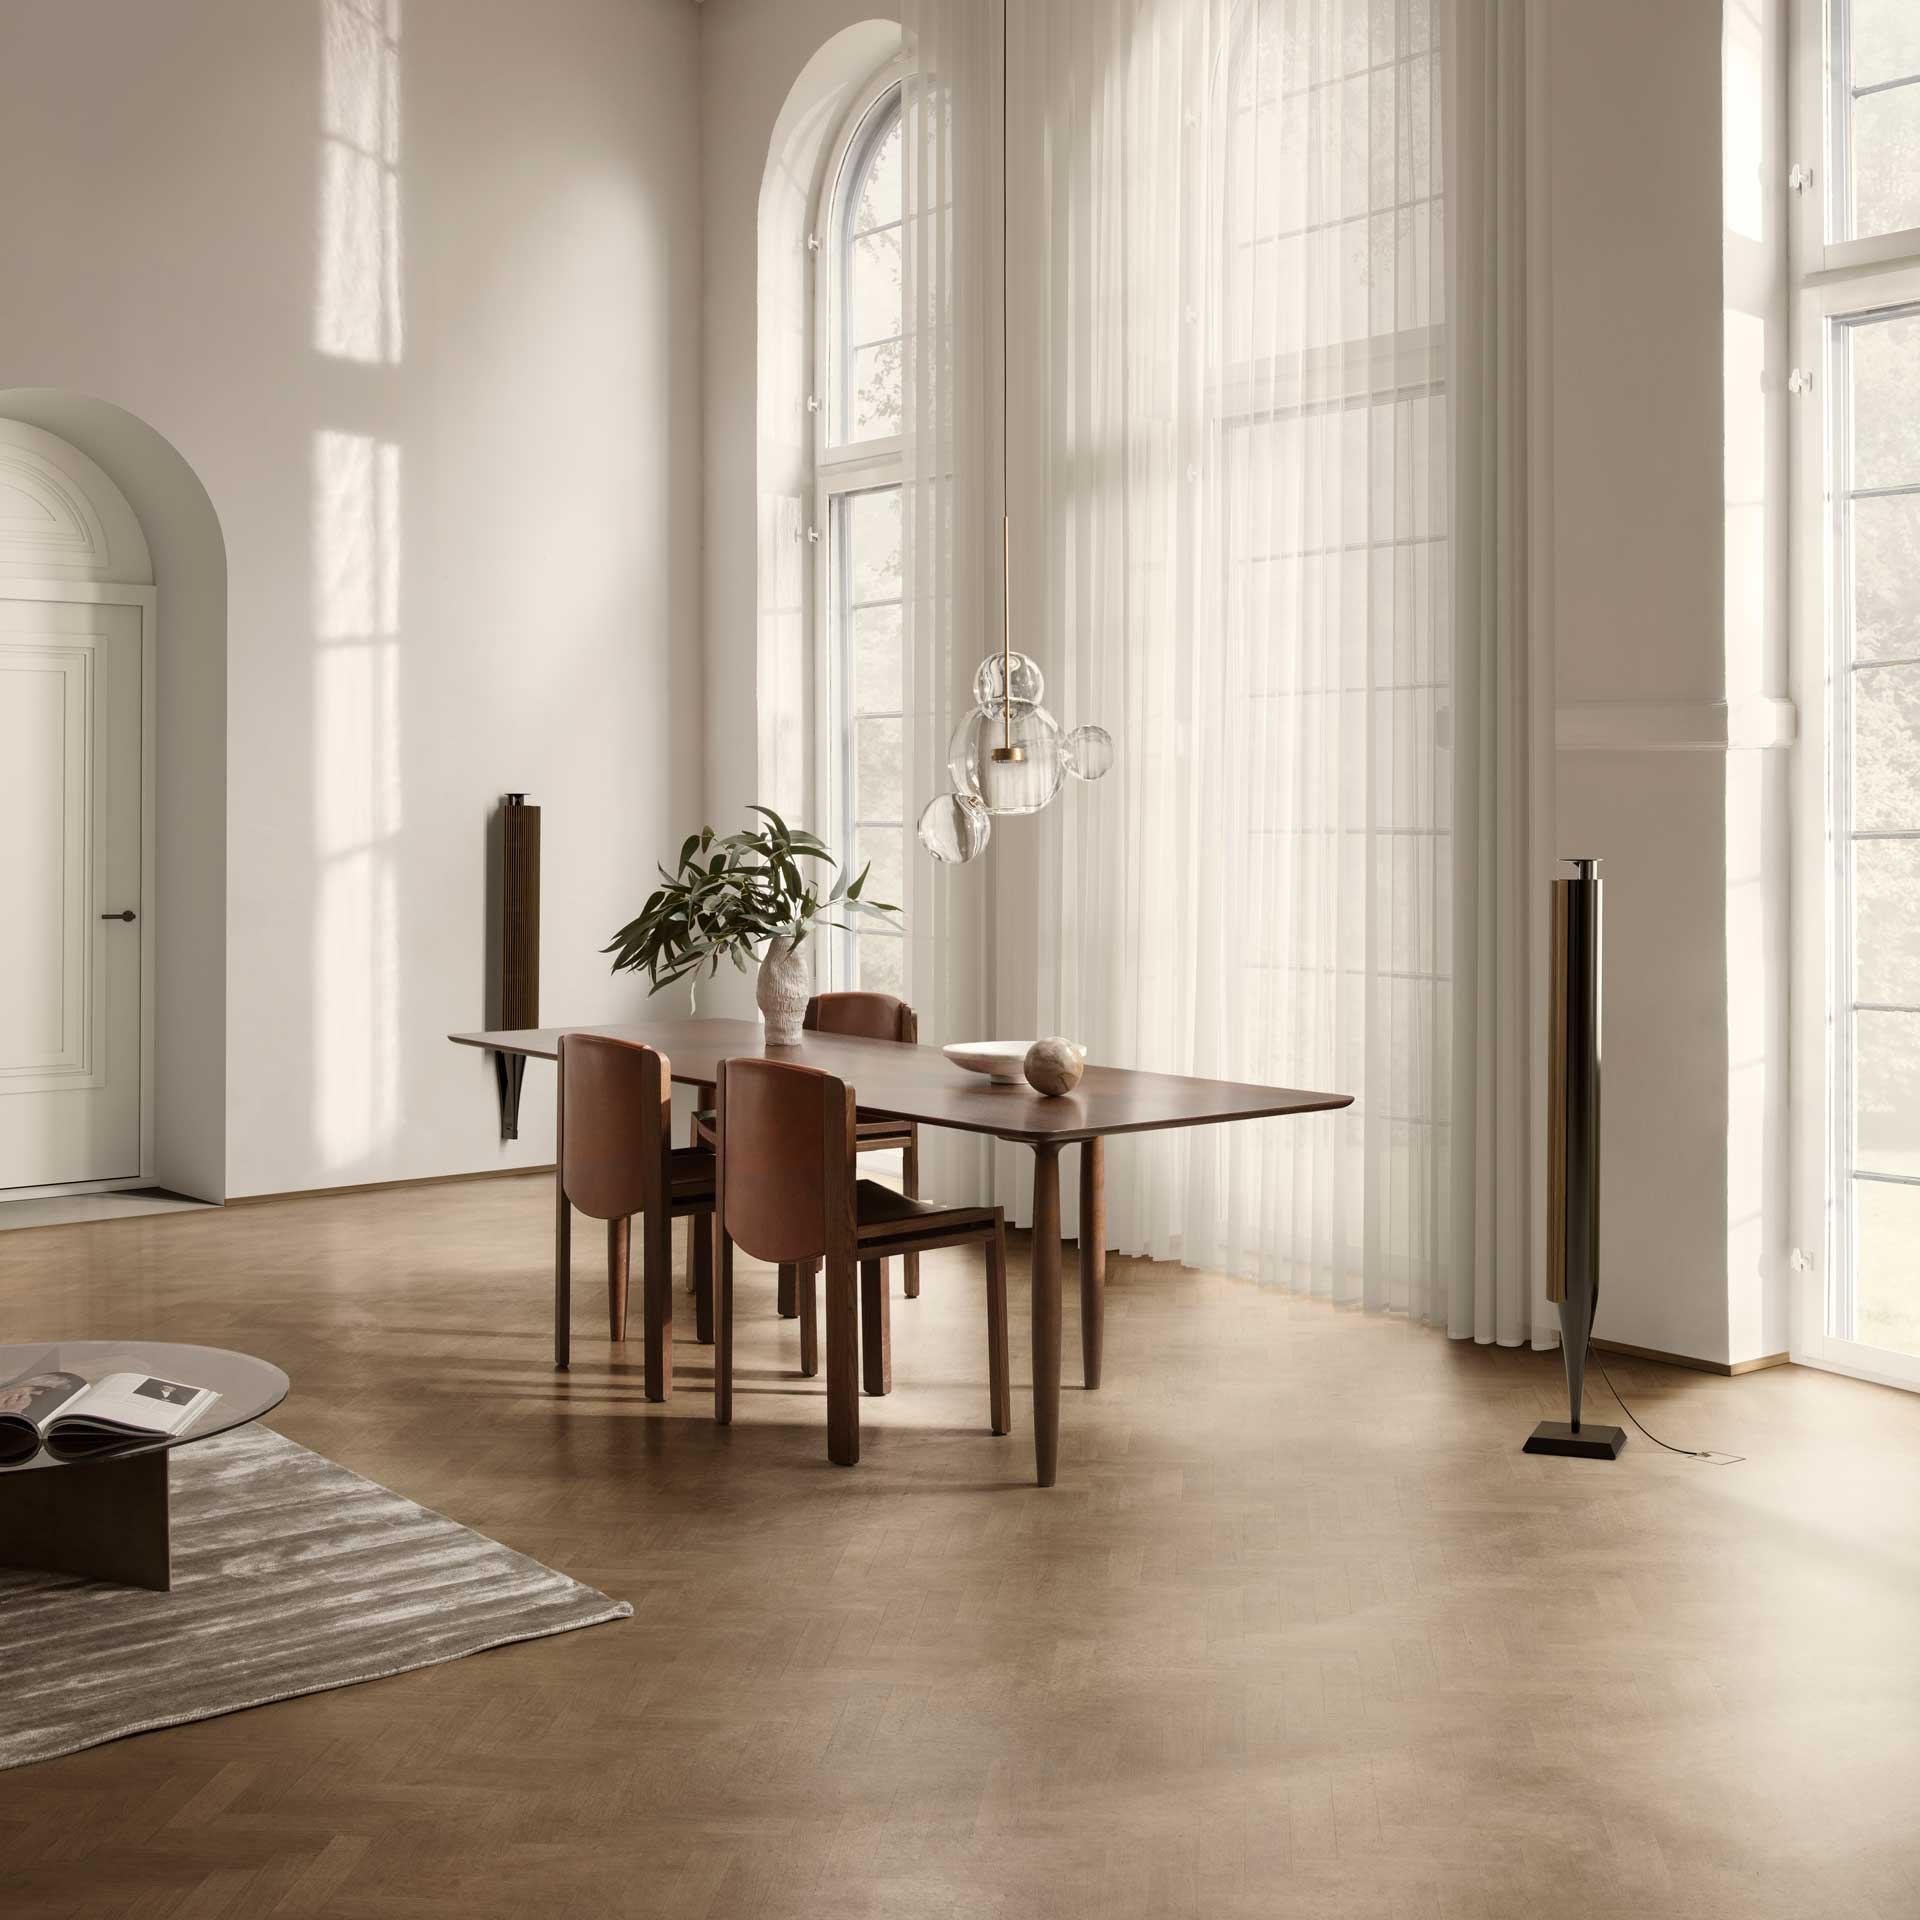 Bang & Olufsen : Luxury home sound systems in Richmond